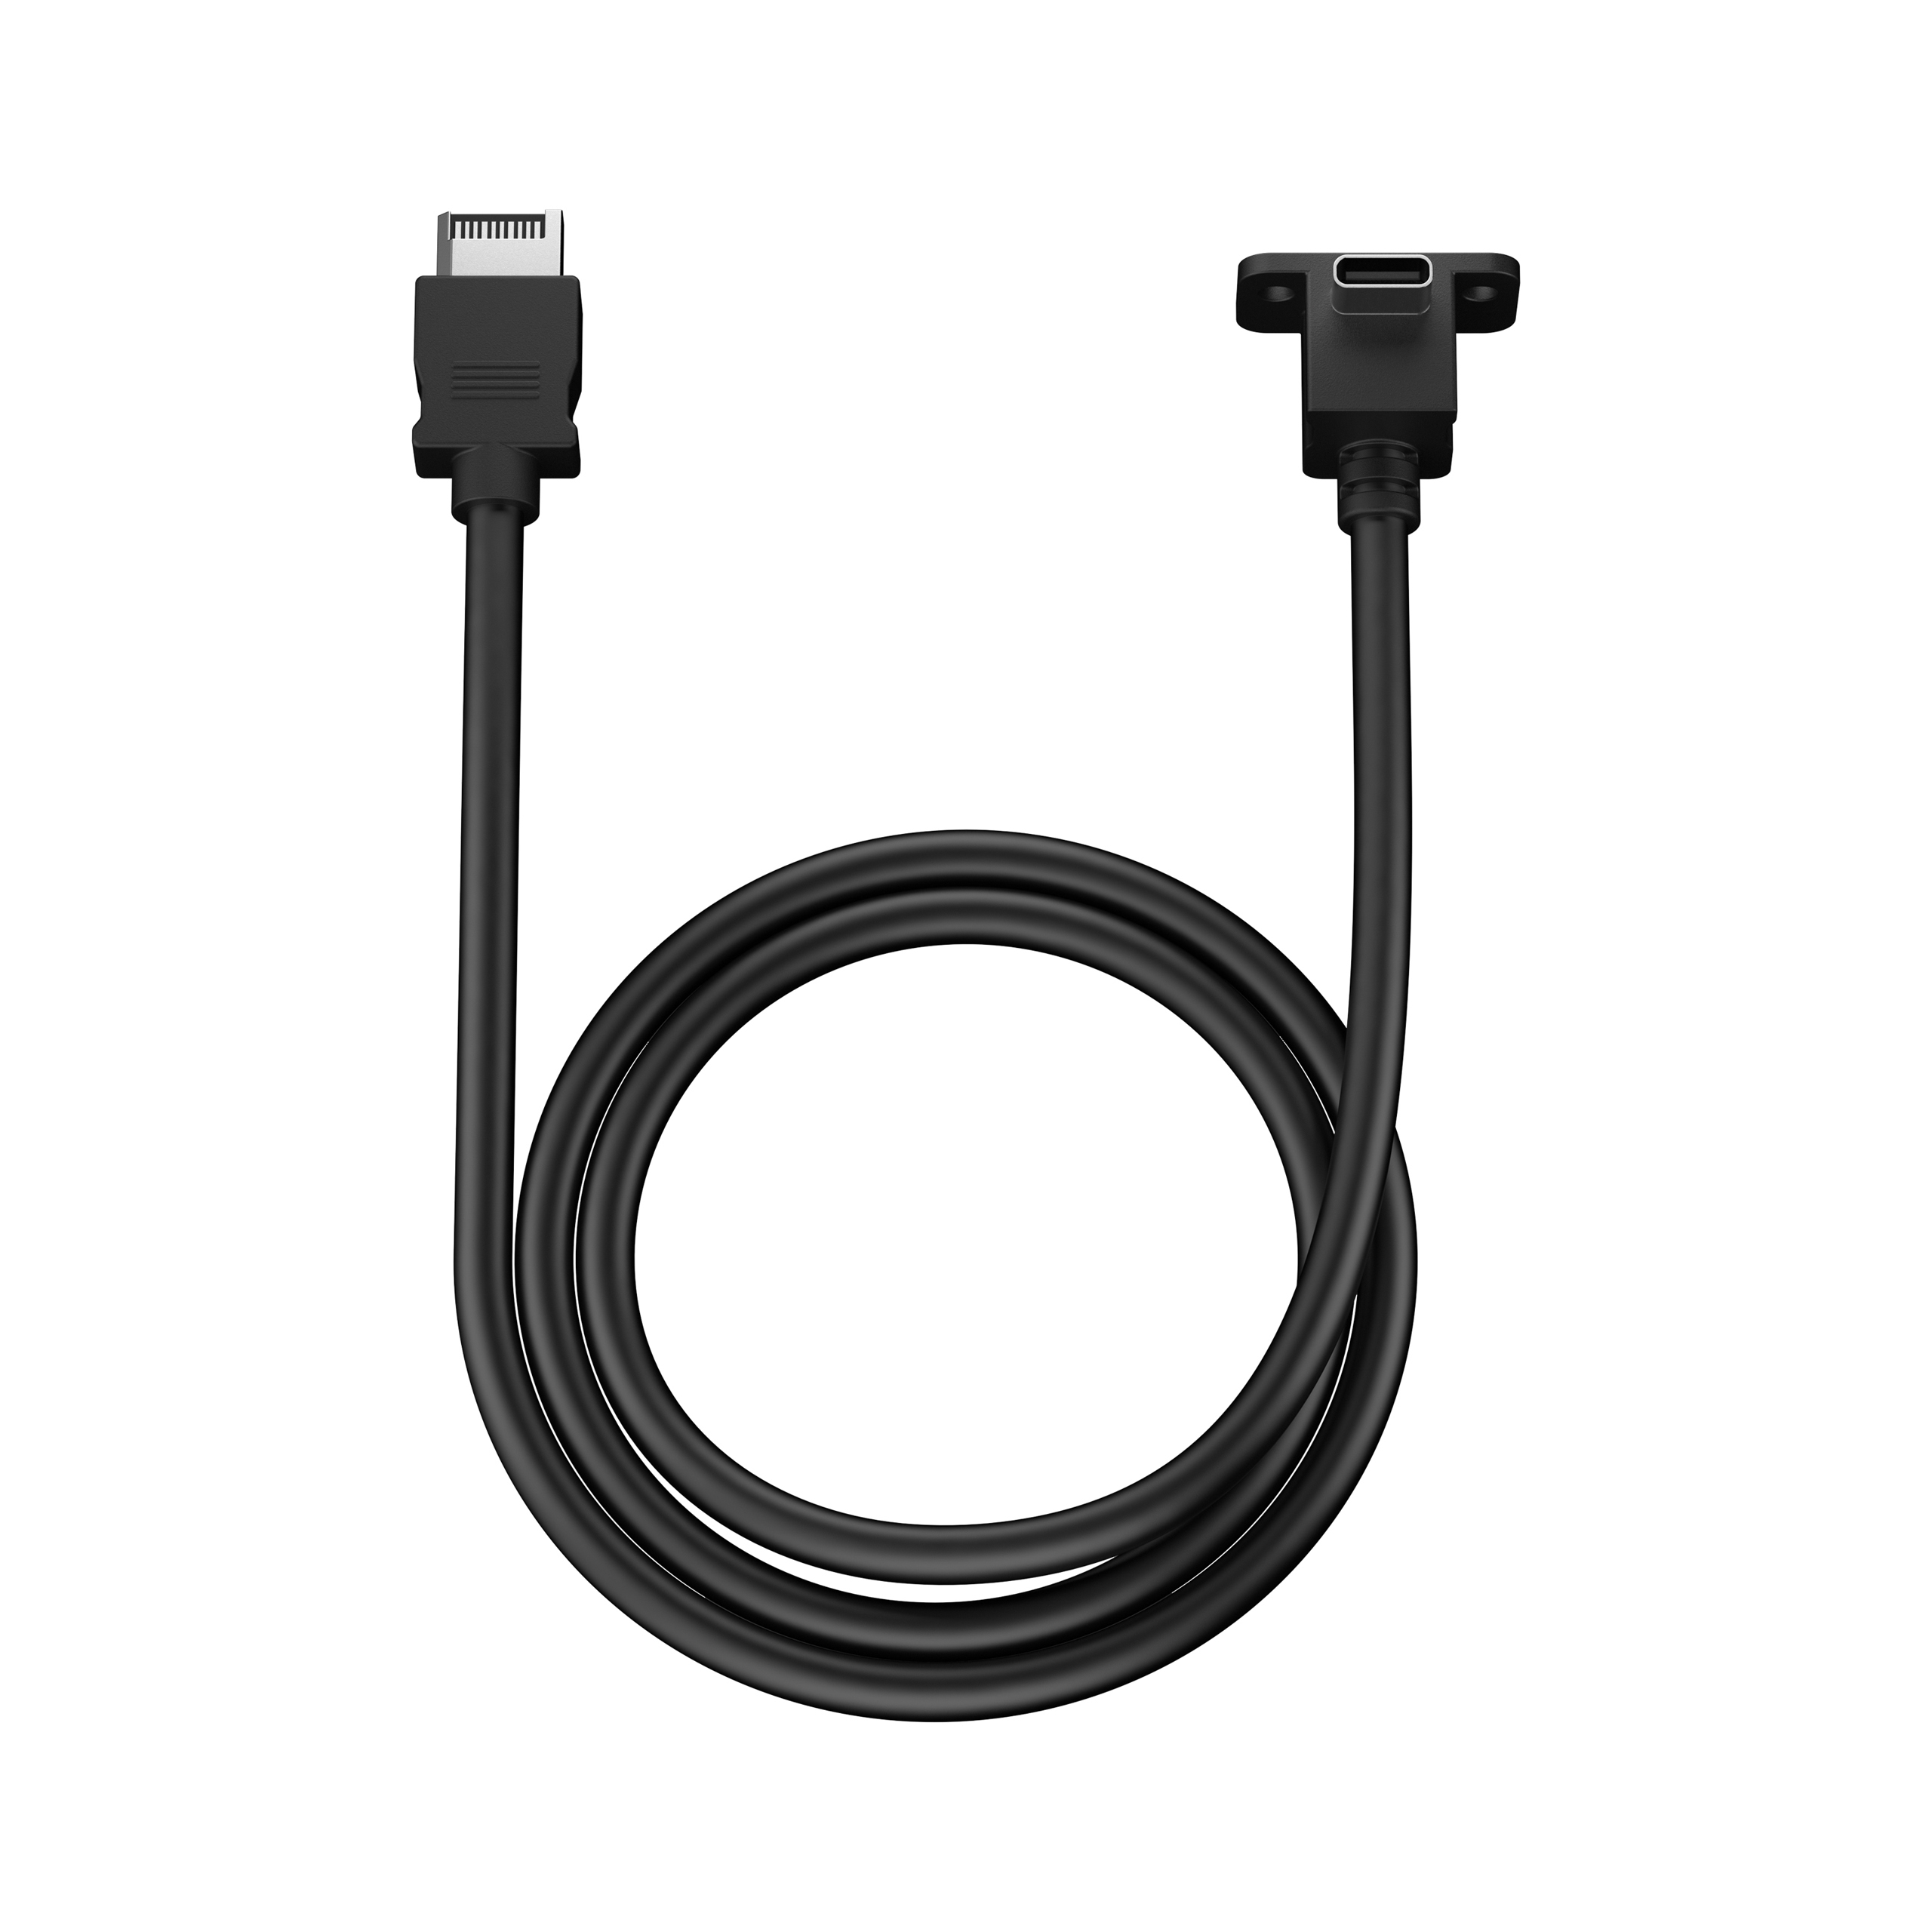 ACC USB-C 10Gbps Cable- Model E